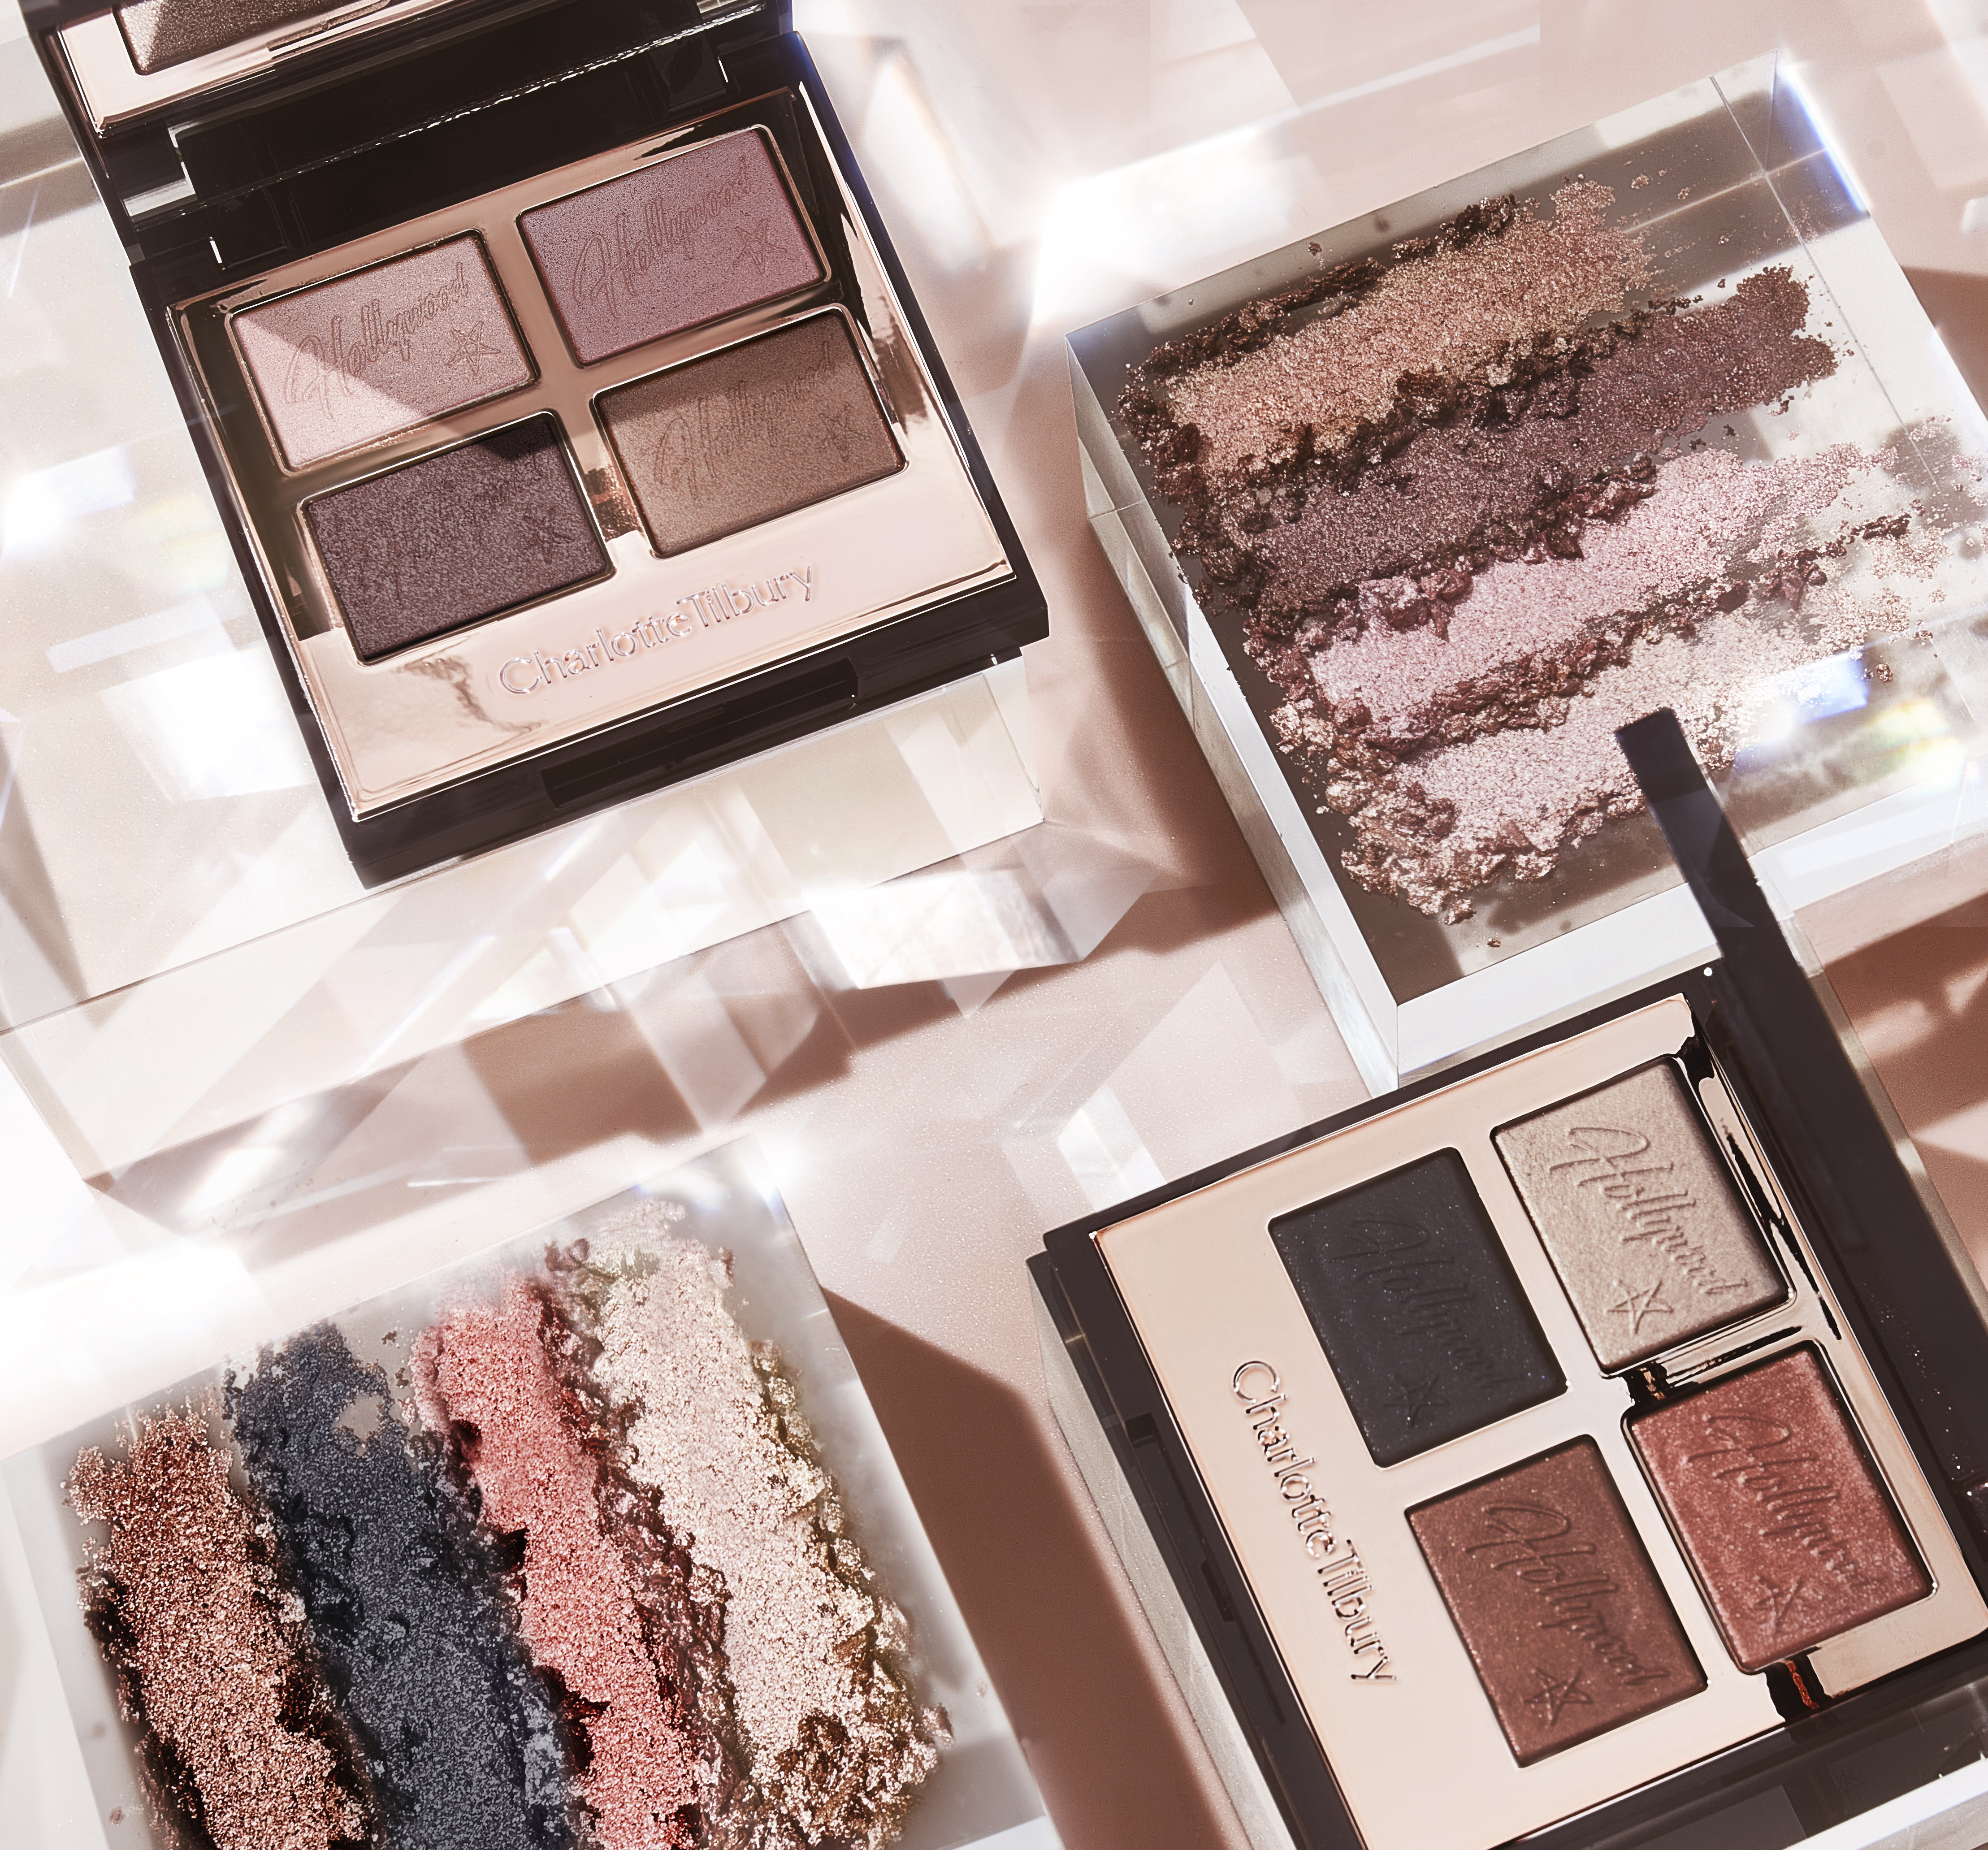 Two, open mirrored-lid quad eyeshadow palettes. One with shimmery and matte eyeshadows in pink champagne, metallic blush pink, mink brown and antiqued brown colours, and the other with matte and shimmery eyeshadows in rose gold, chocolate brown, champagne, and black.